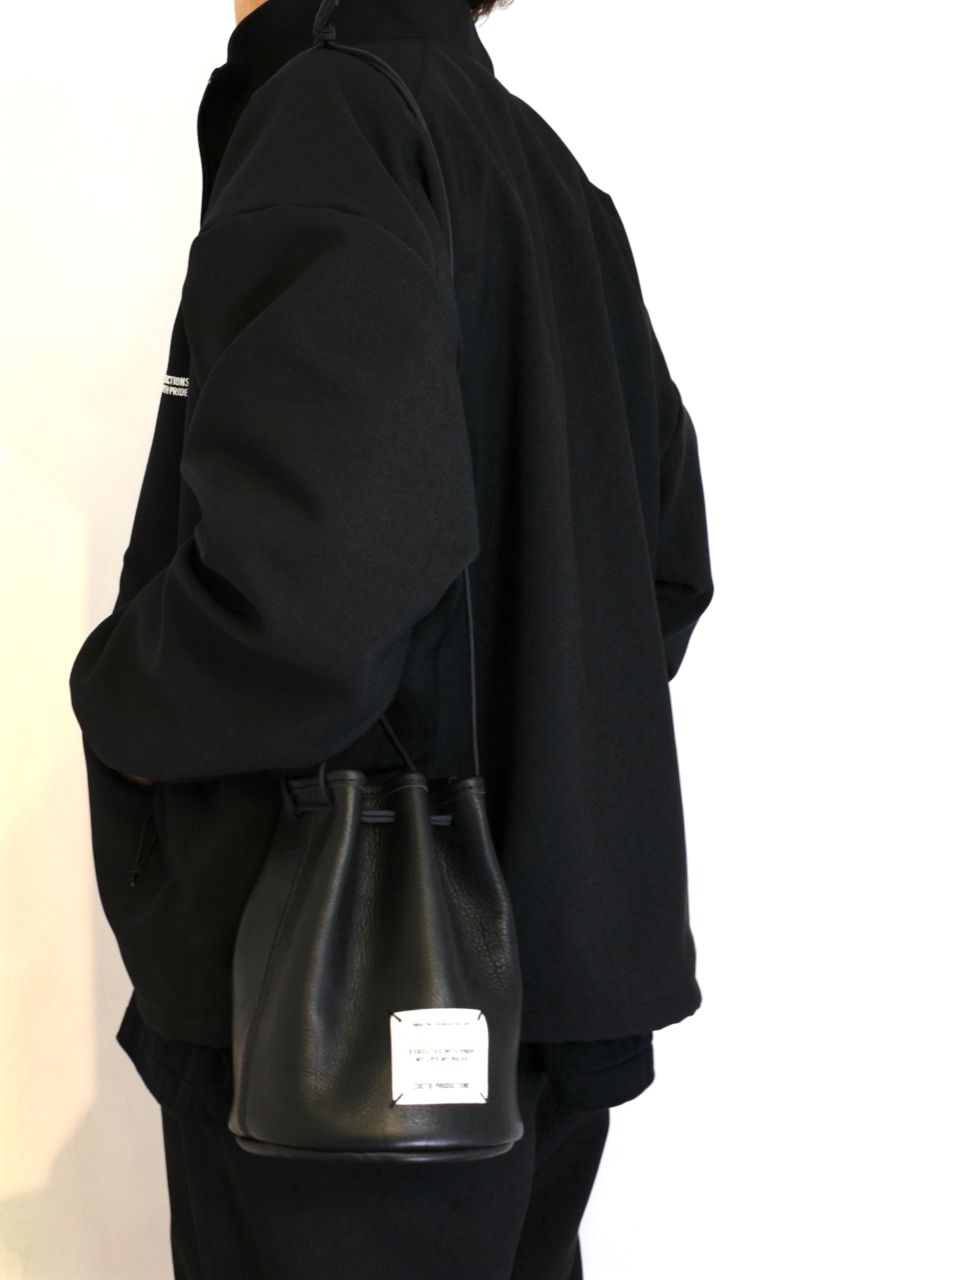 COOTIE PRODUCTIONS - Leather Bucket Bag (BLACK) / レザー